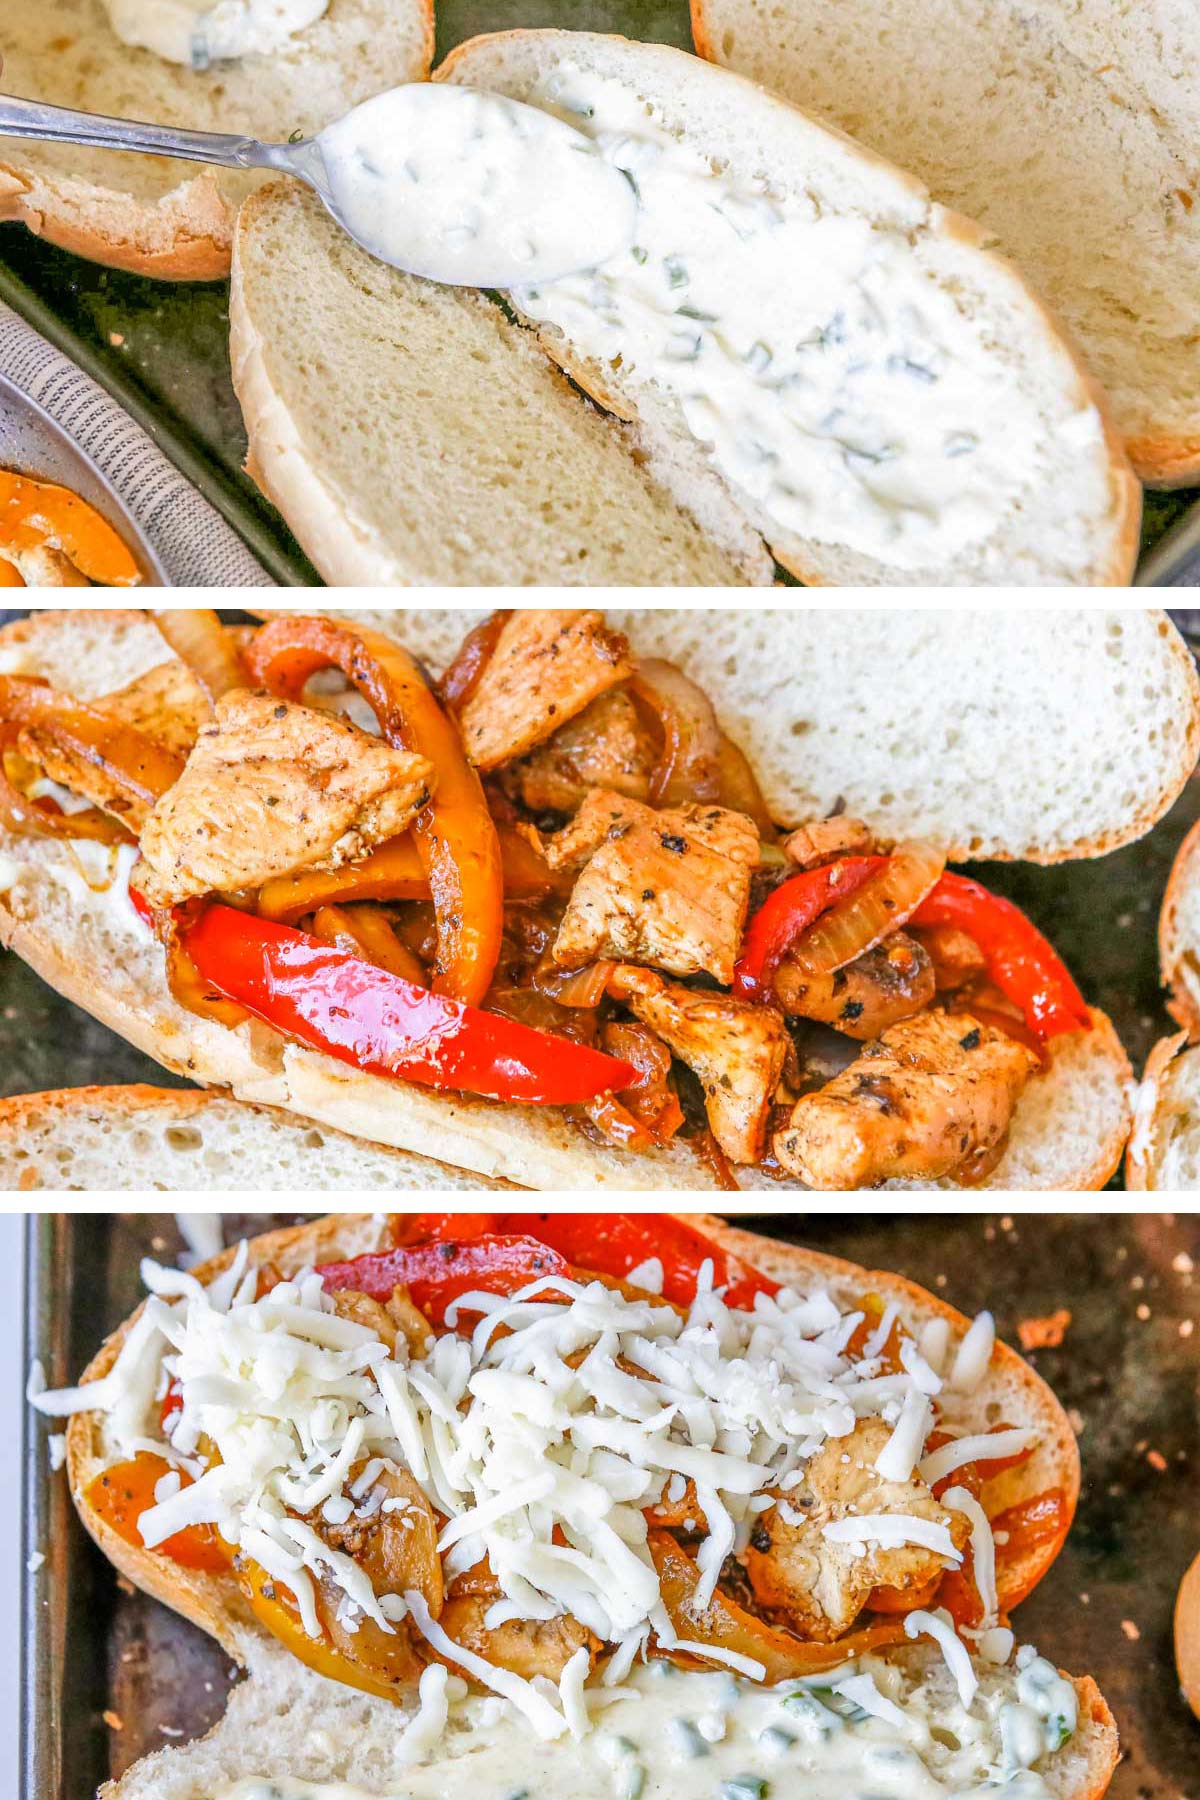 a collage of steps to assemble the sandwich: Smearing garlic aioli on a bun, topping bun with chicken and pepper mixture and final photo showing bun and chicken topped with shredded cheese.